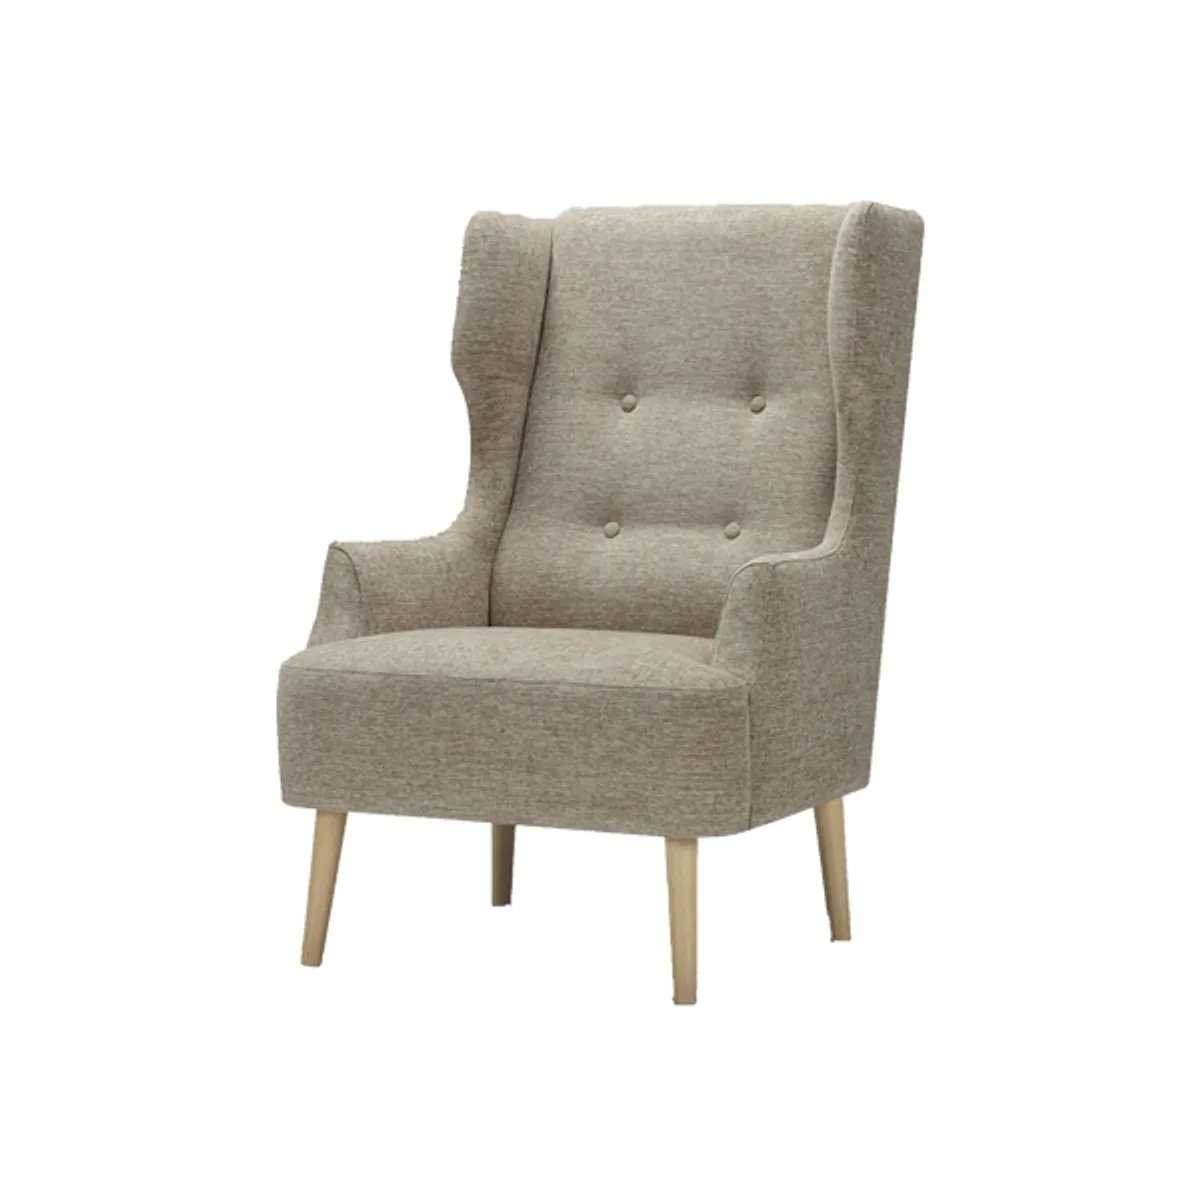 Sandrawingbackchair Inside Out Contracts2